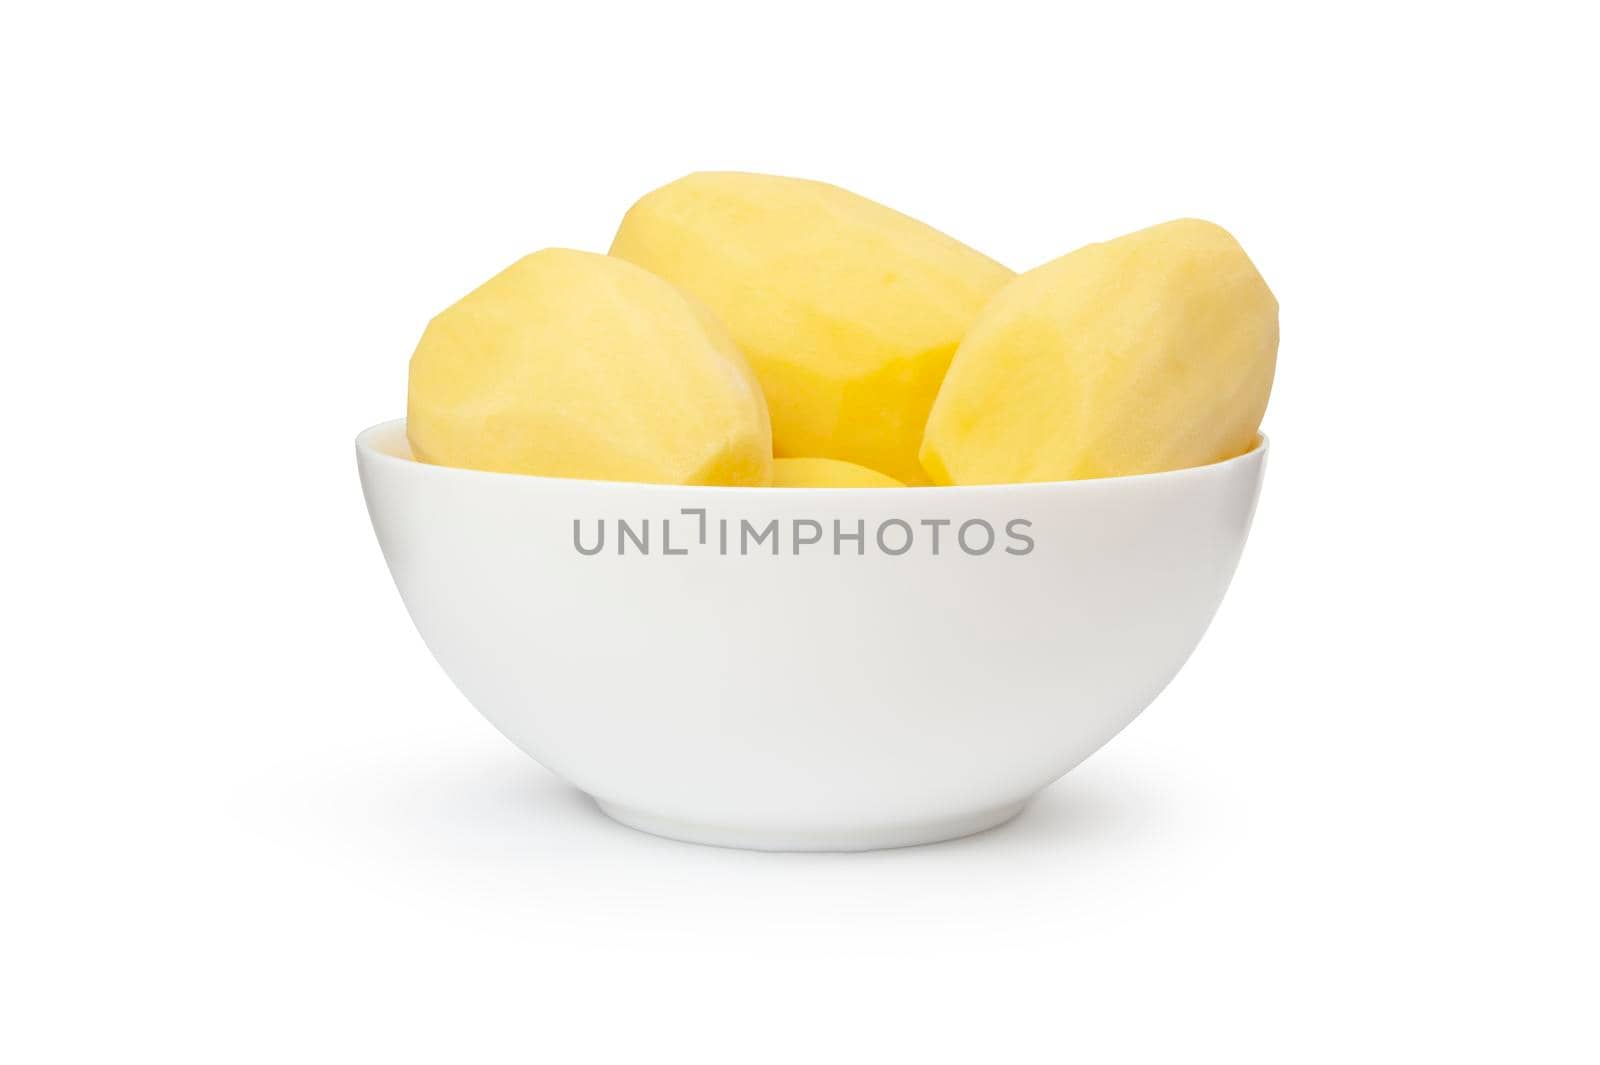 Peeled potatoes in a white bowl isolated on white background by SlayCer